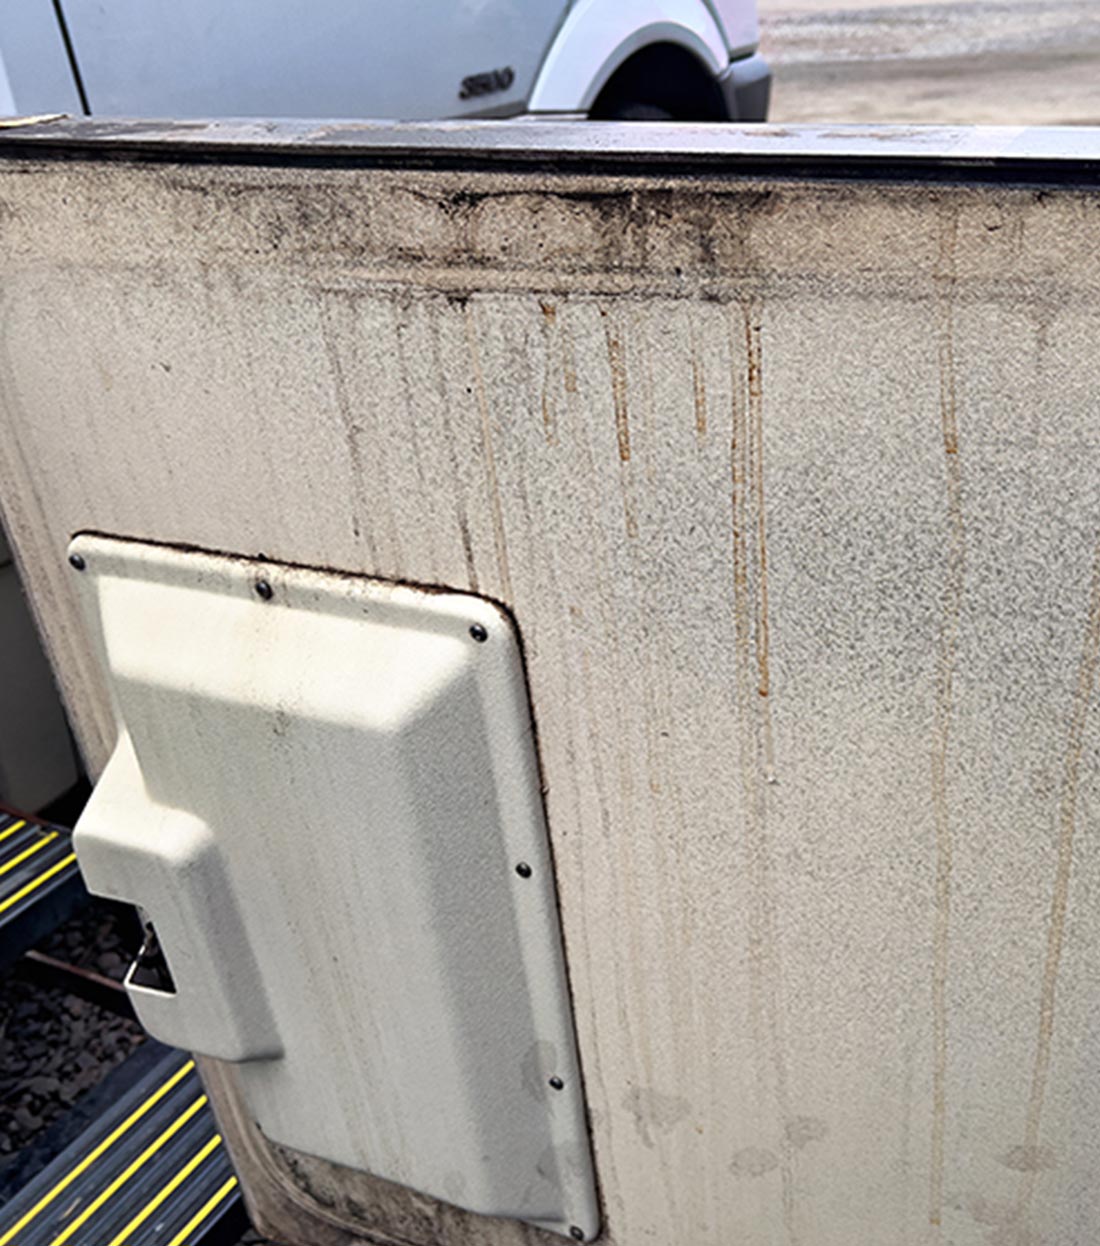 an RV cargo compartment door showing signs of leak damage